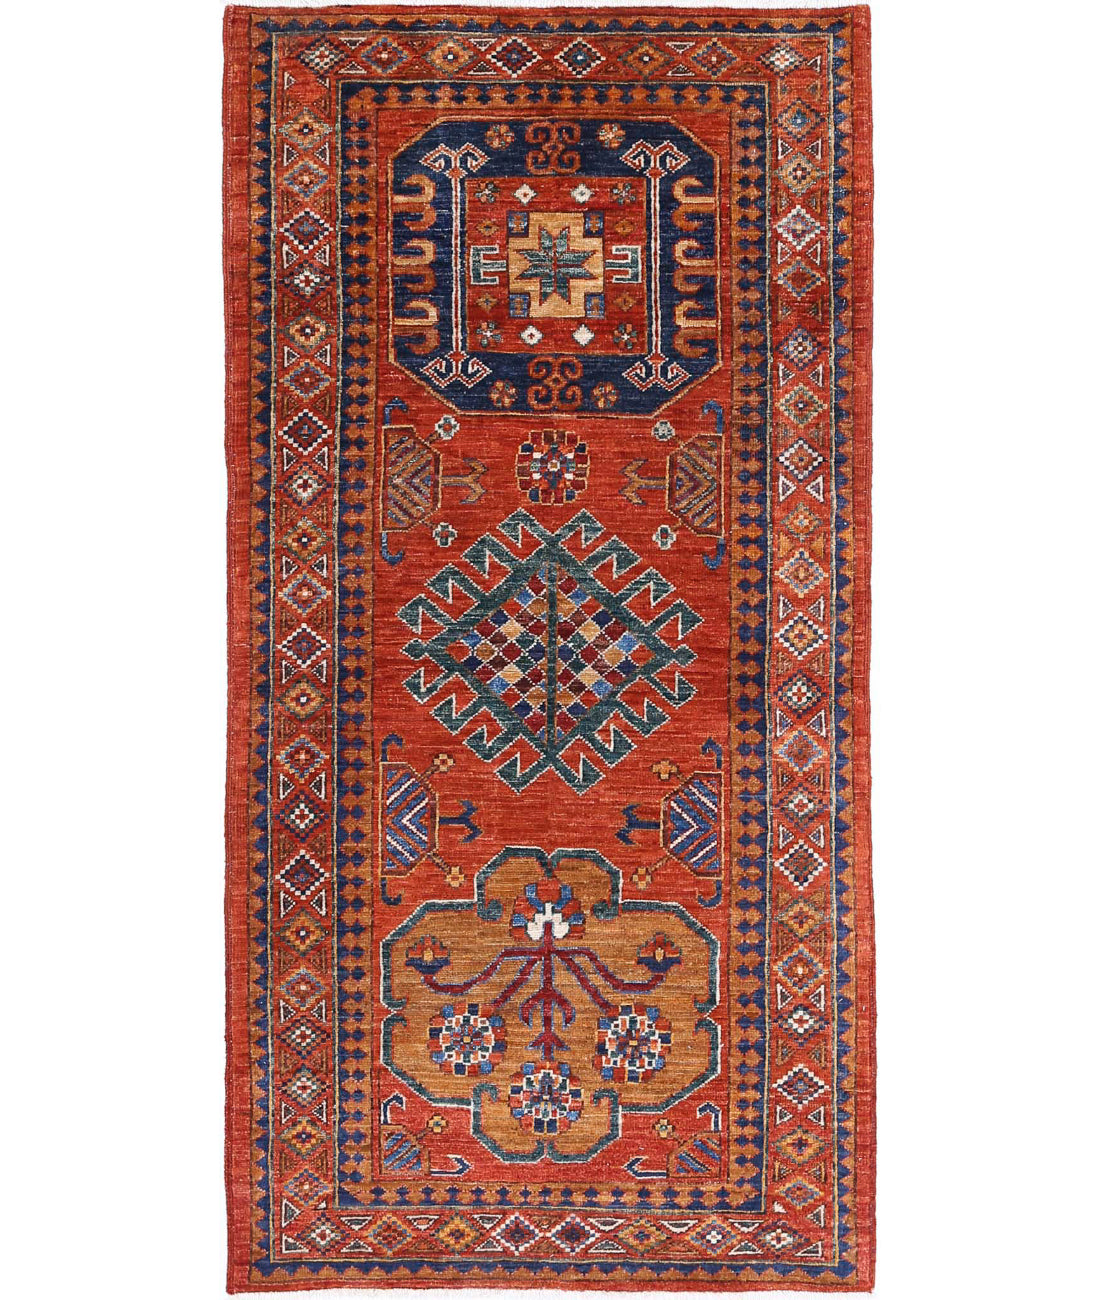 Hand Knotted Nomadic Caucasian Humna Wool Rug - 2'8'' x 5'9'' 2'8'' x 5'9'' (80 X 173) / Rust / Gold